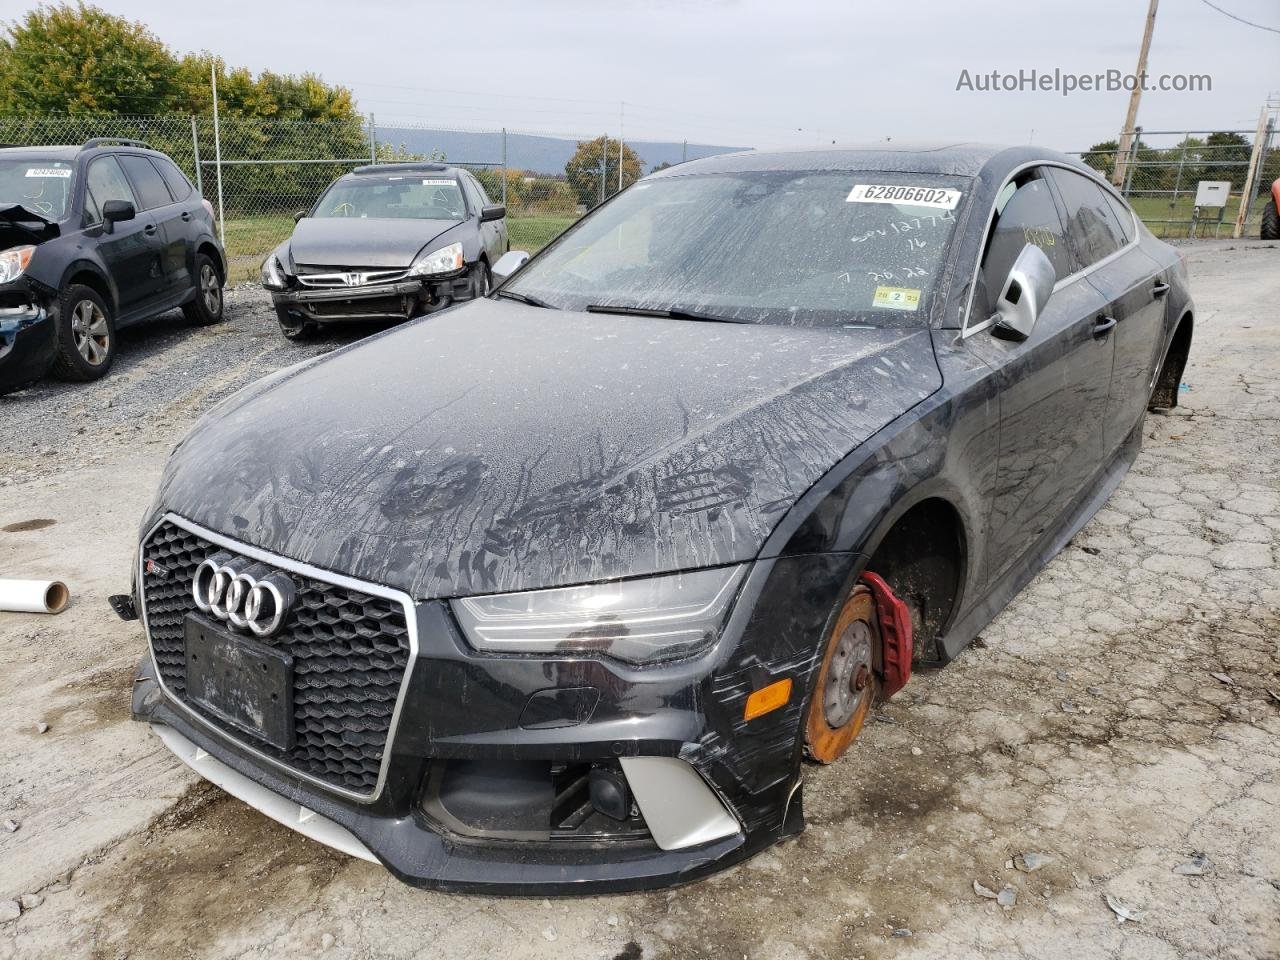 Price & History 2016 Audi Rs7 4.0l 8 vin: WUAW2AFC0GN902580 